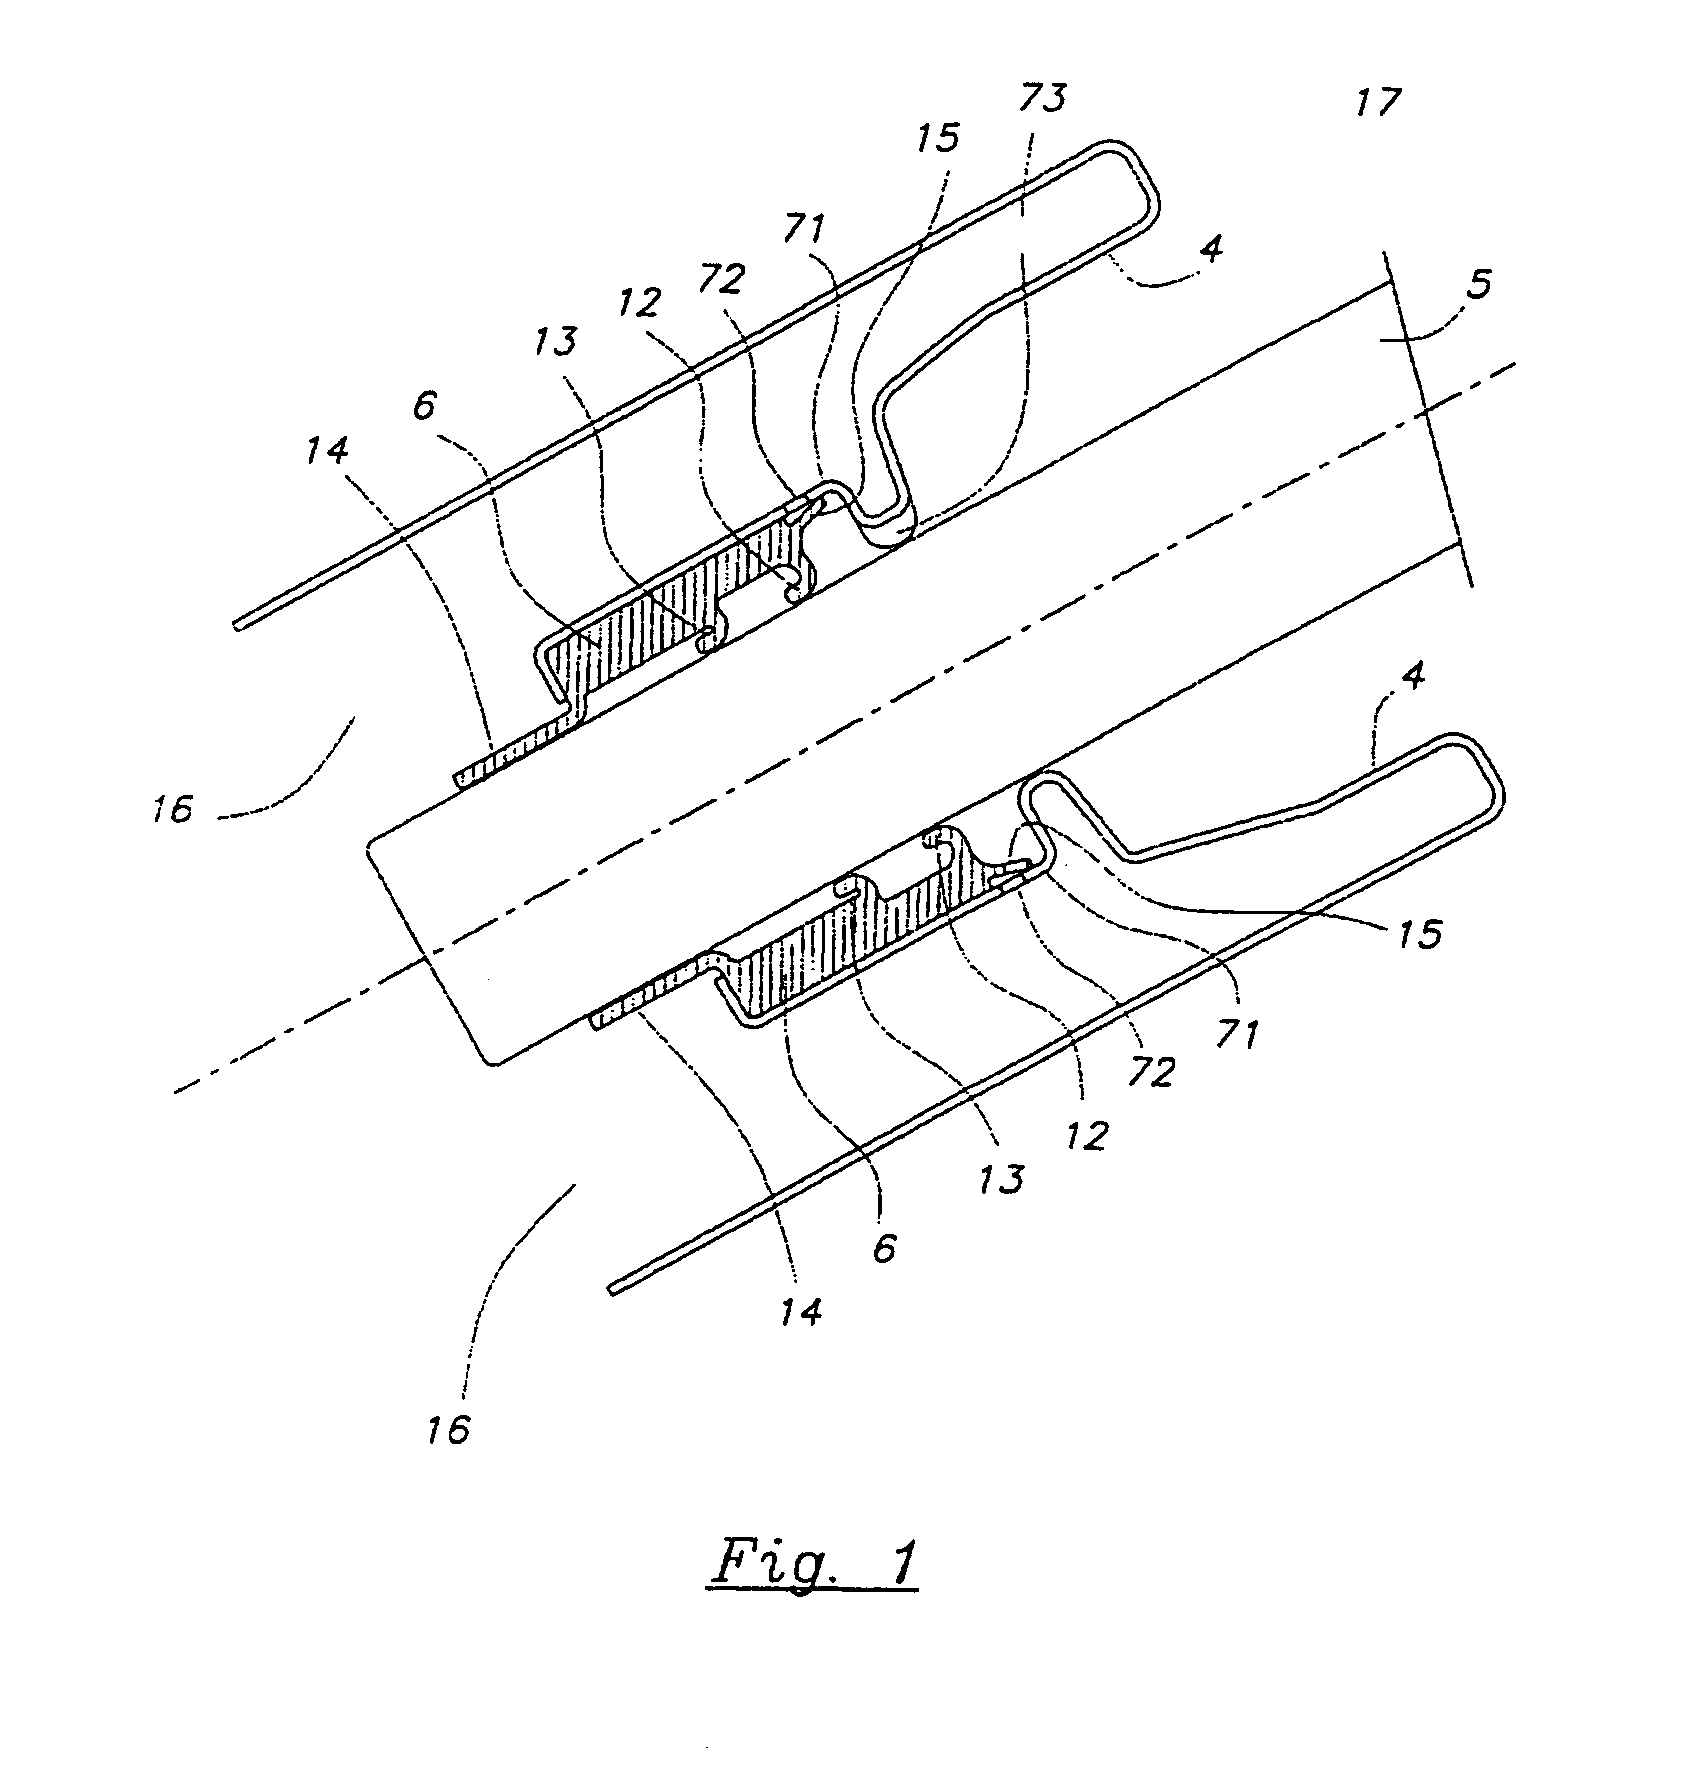 Sealing and safety device for filling a hollow body with a liquid